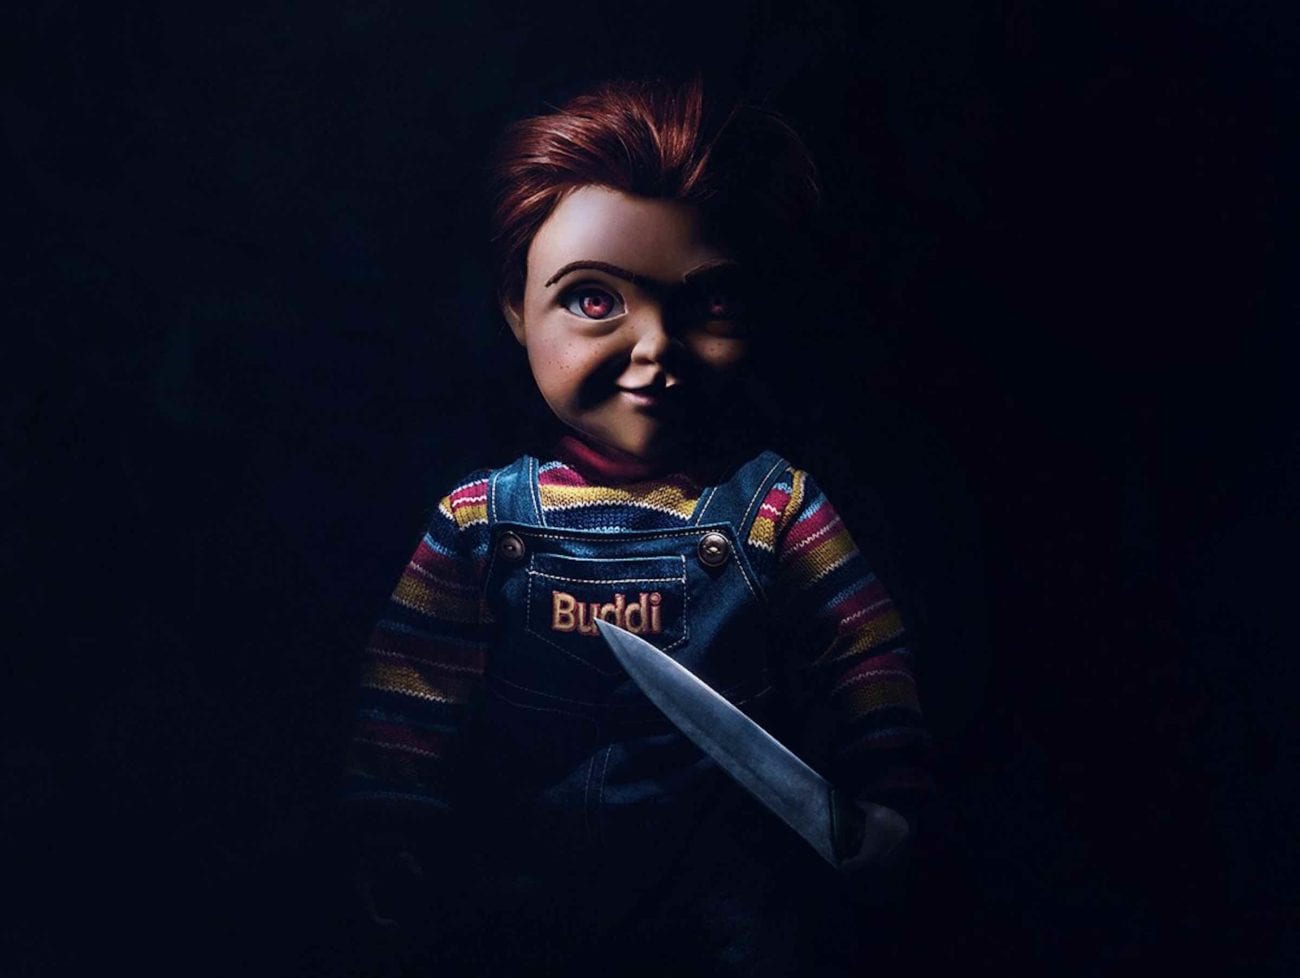 We’ve always loved a creepy supernatural flick including the doll 'Annabelle', and these are the most spine-chilling takes on a good old haunting.